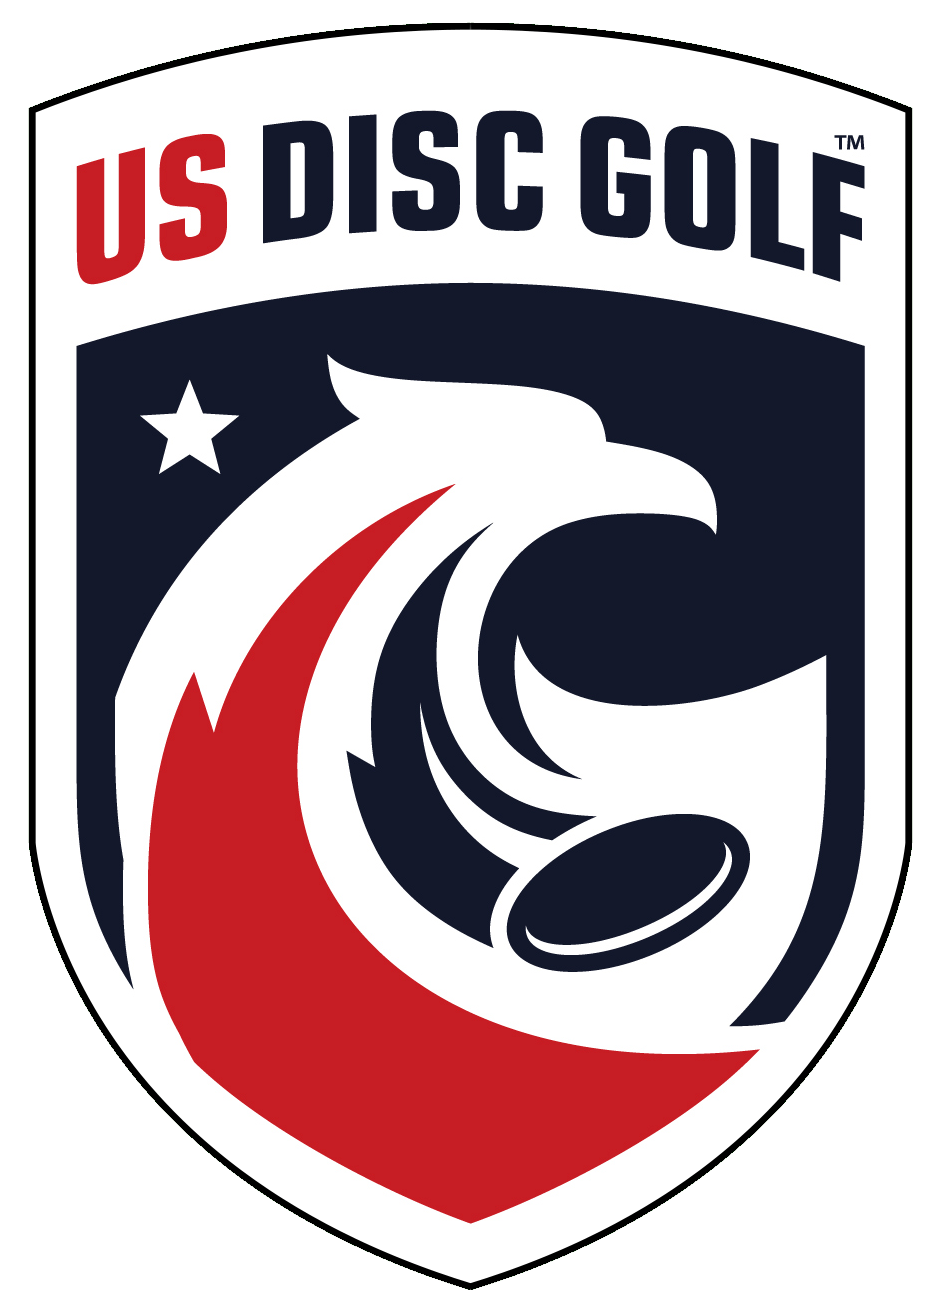 United States Disc Golf Championship – Industry-Leading Event Management